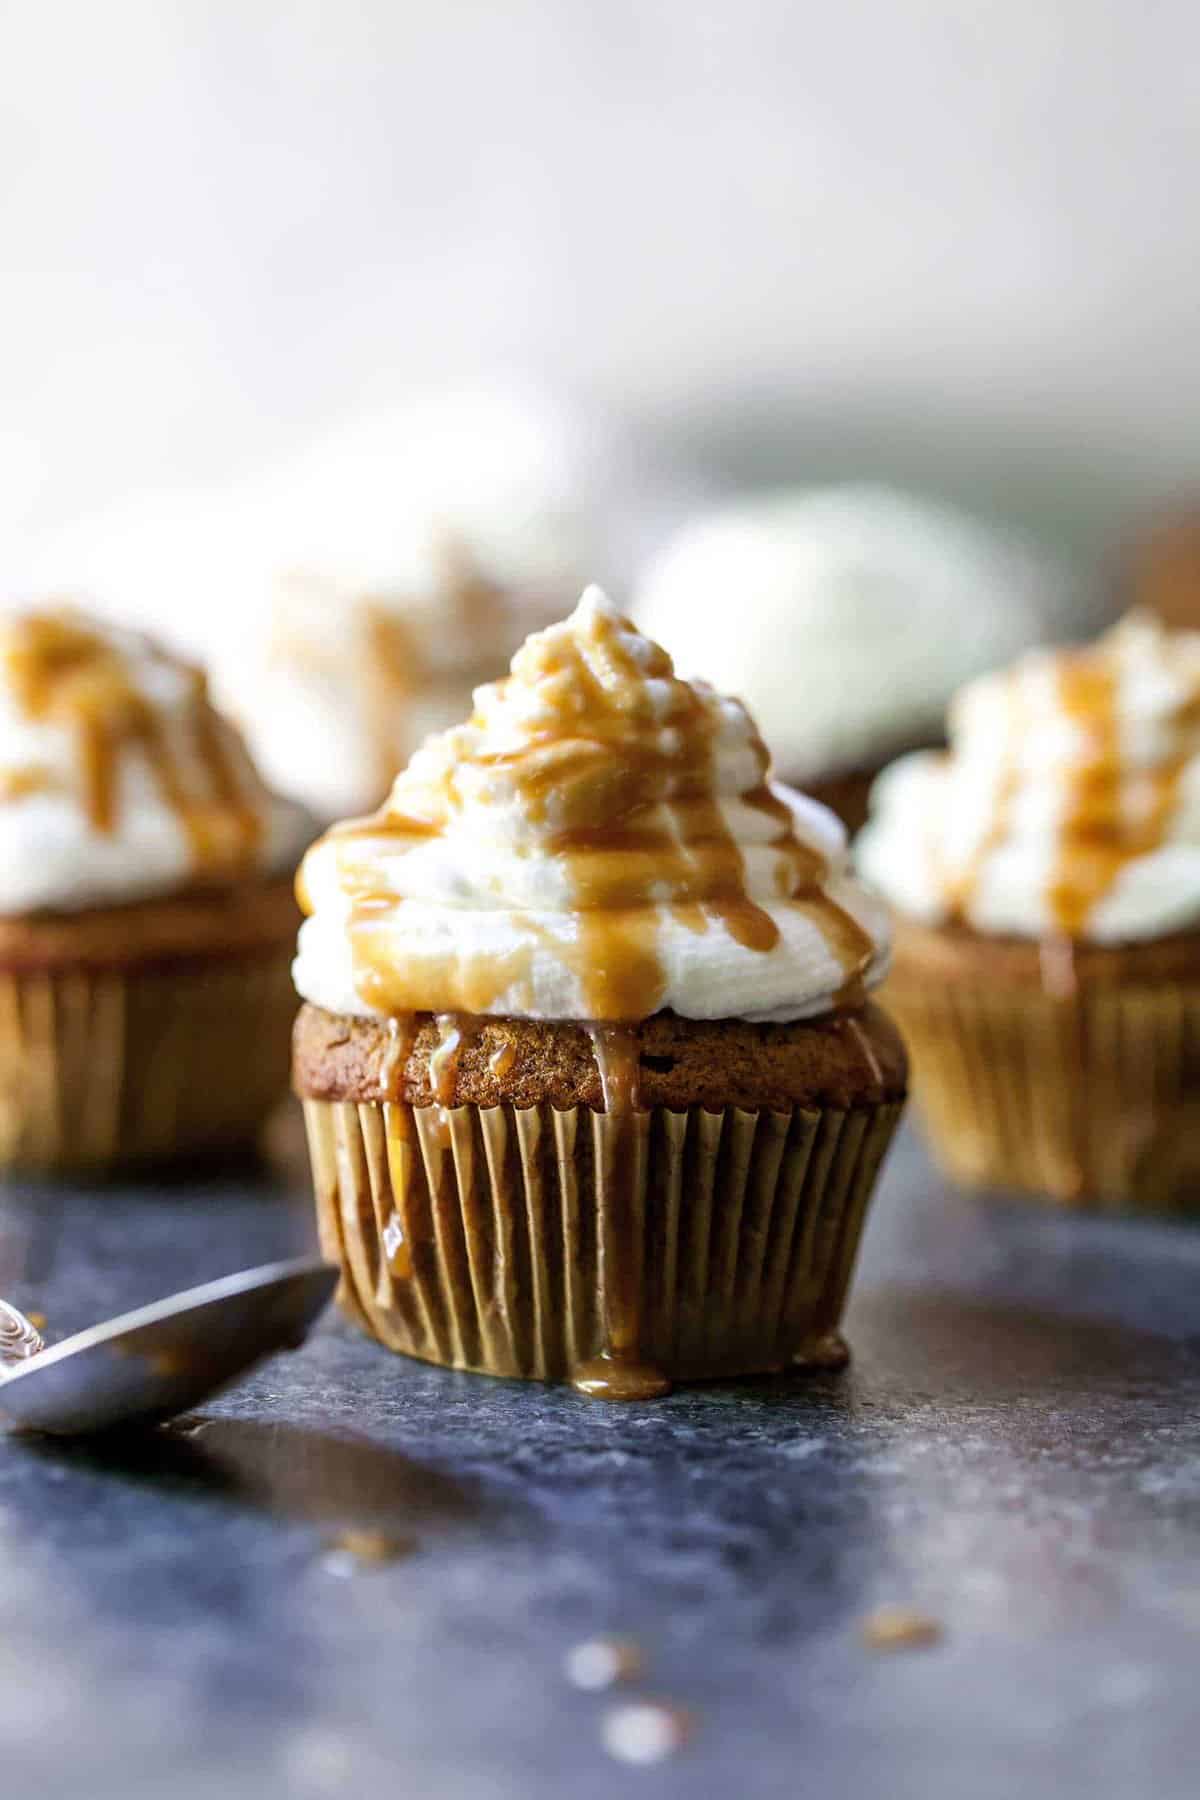 Closeup shot of pumpkin spice latte cupcake with caramel dripping down the sides